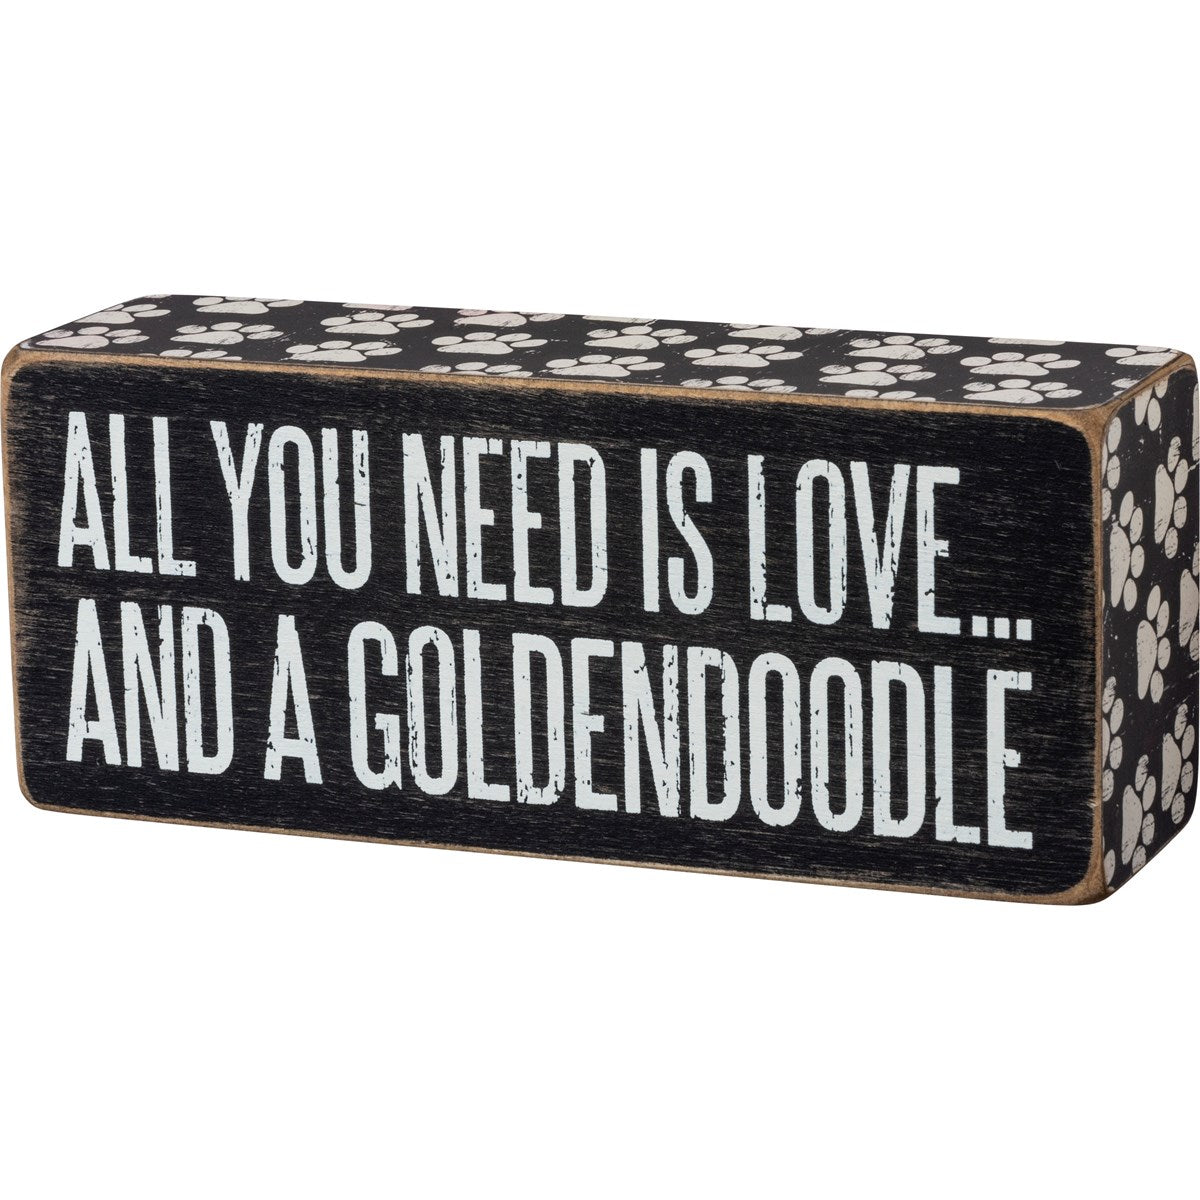 All You Need Is Love And A Goldendoodle Box Sign